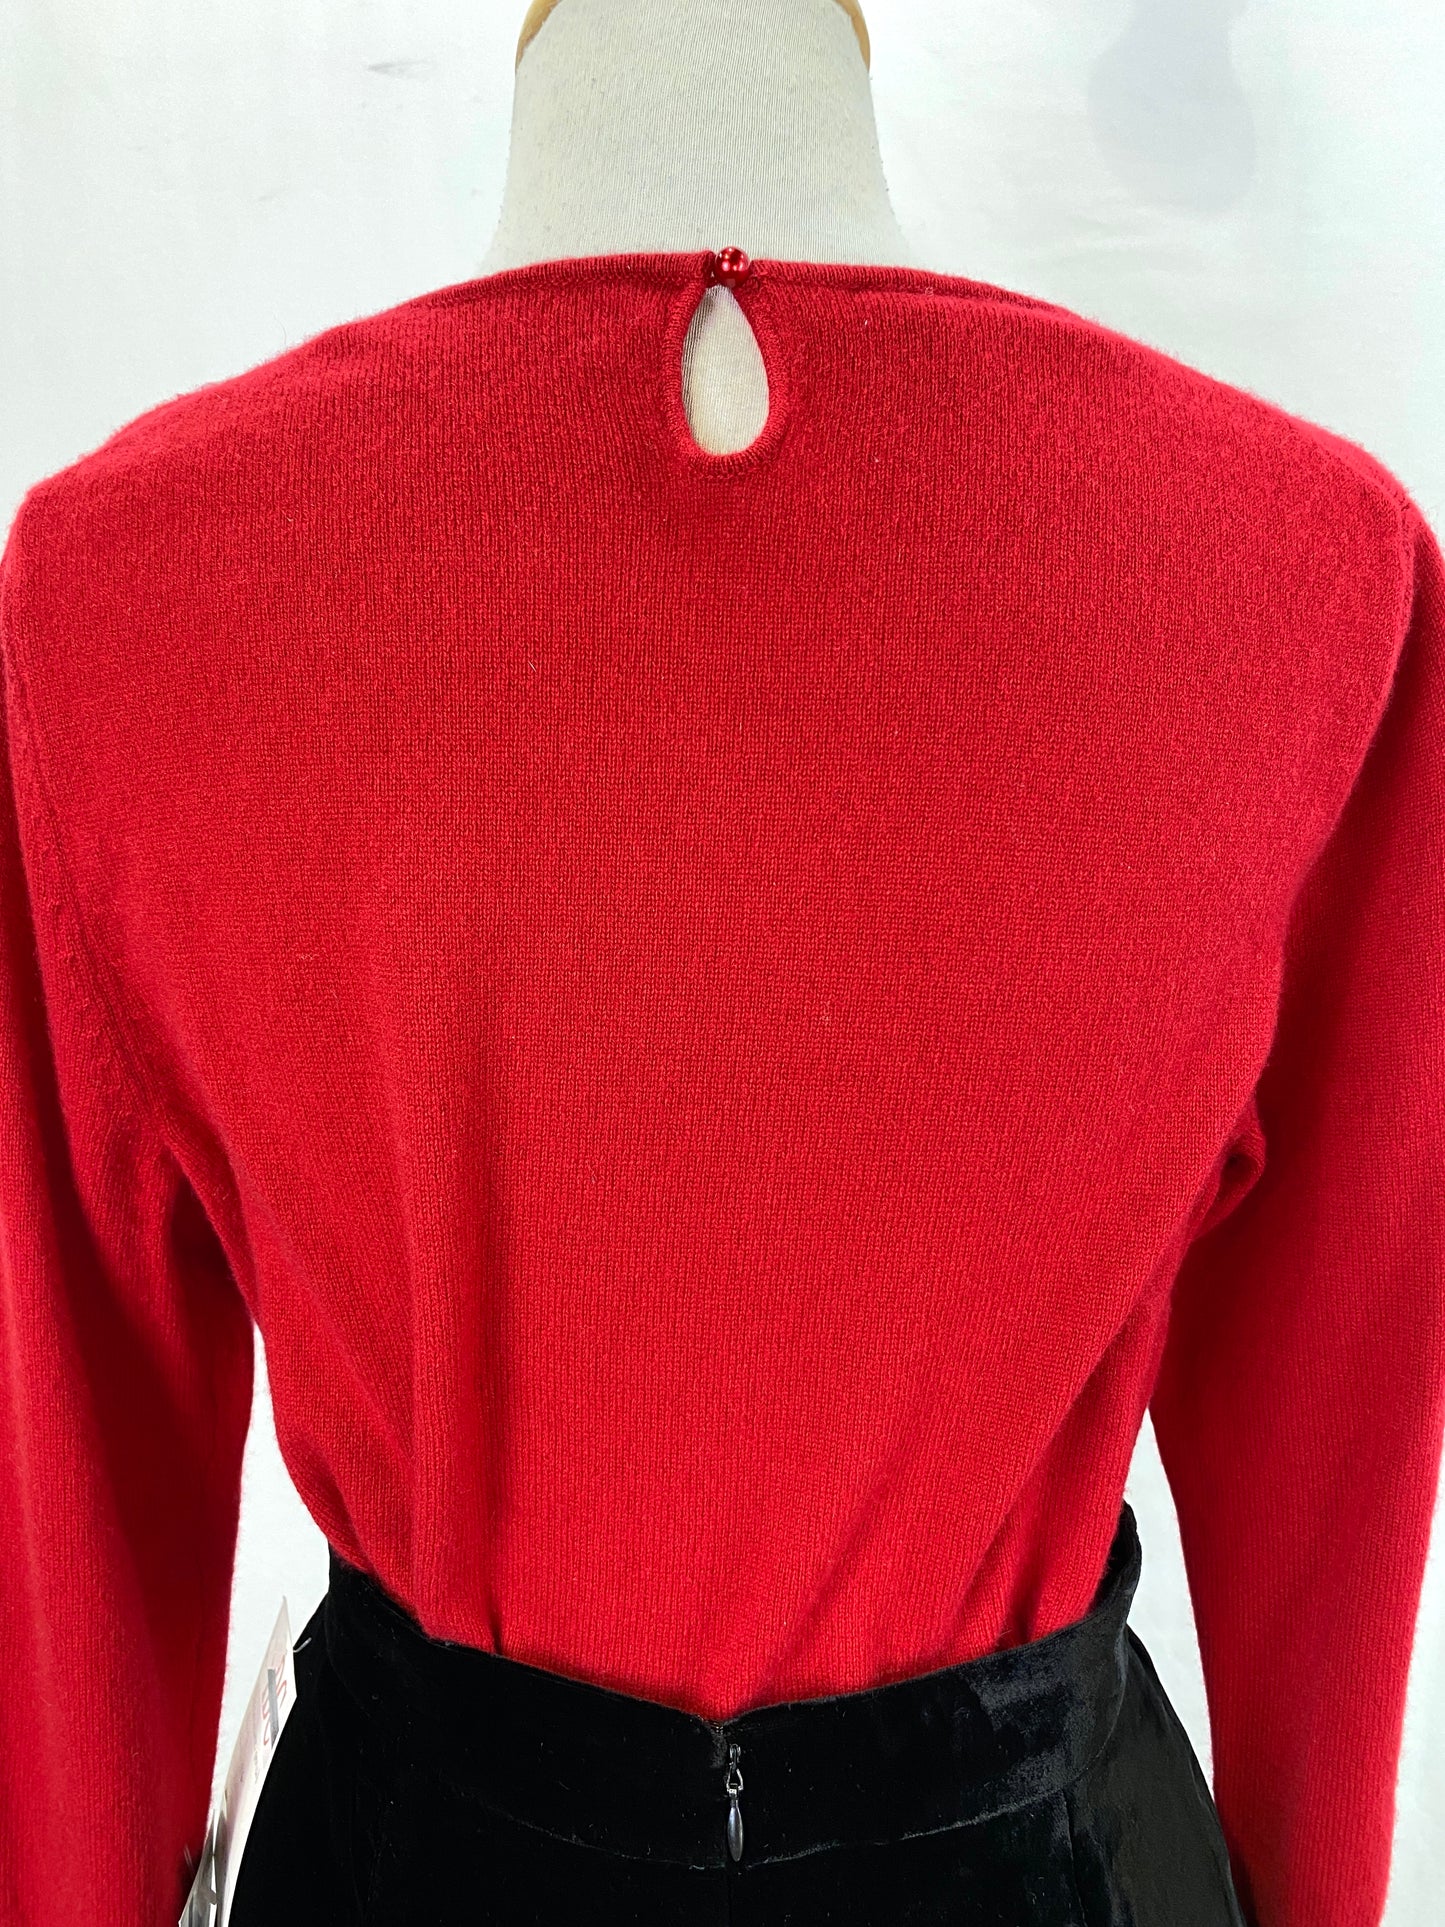 Back of red vintage cashmere sweater showing keyhole opening with button at back of neck. Ian Drummond Vintage.